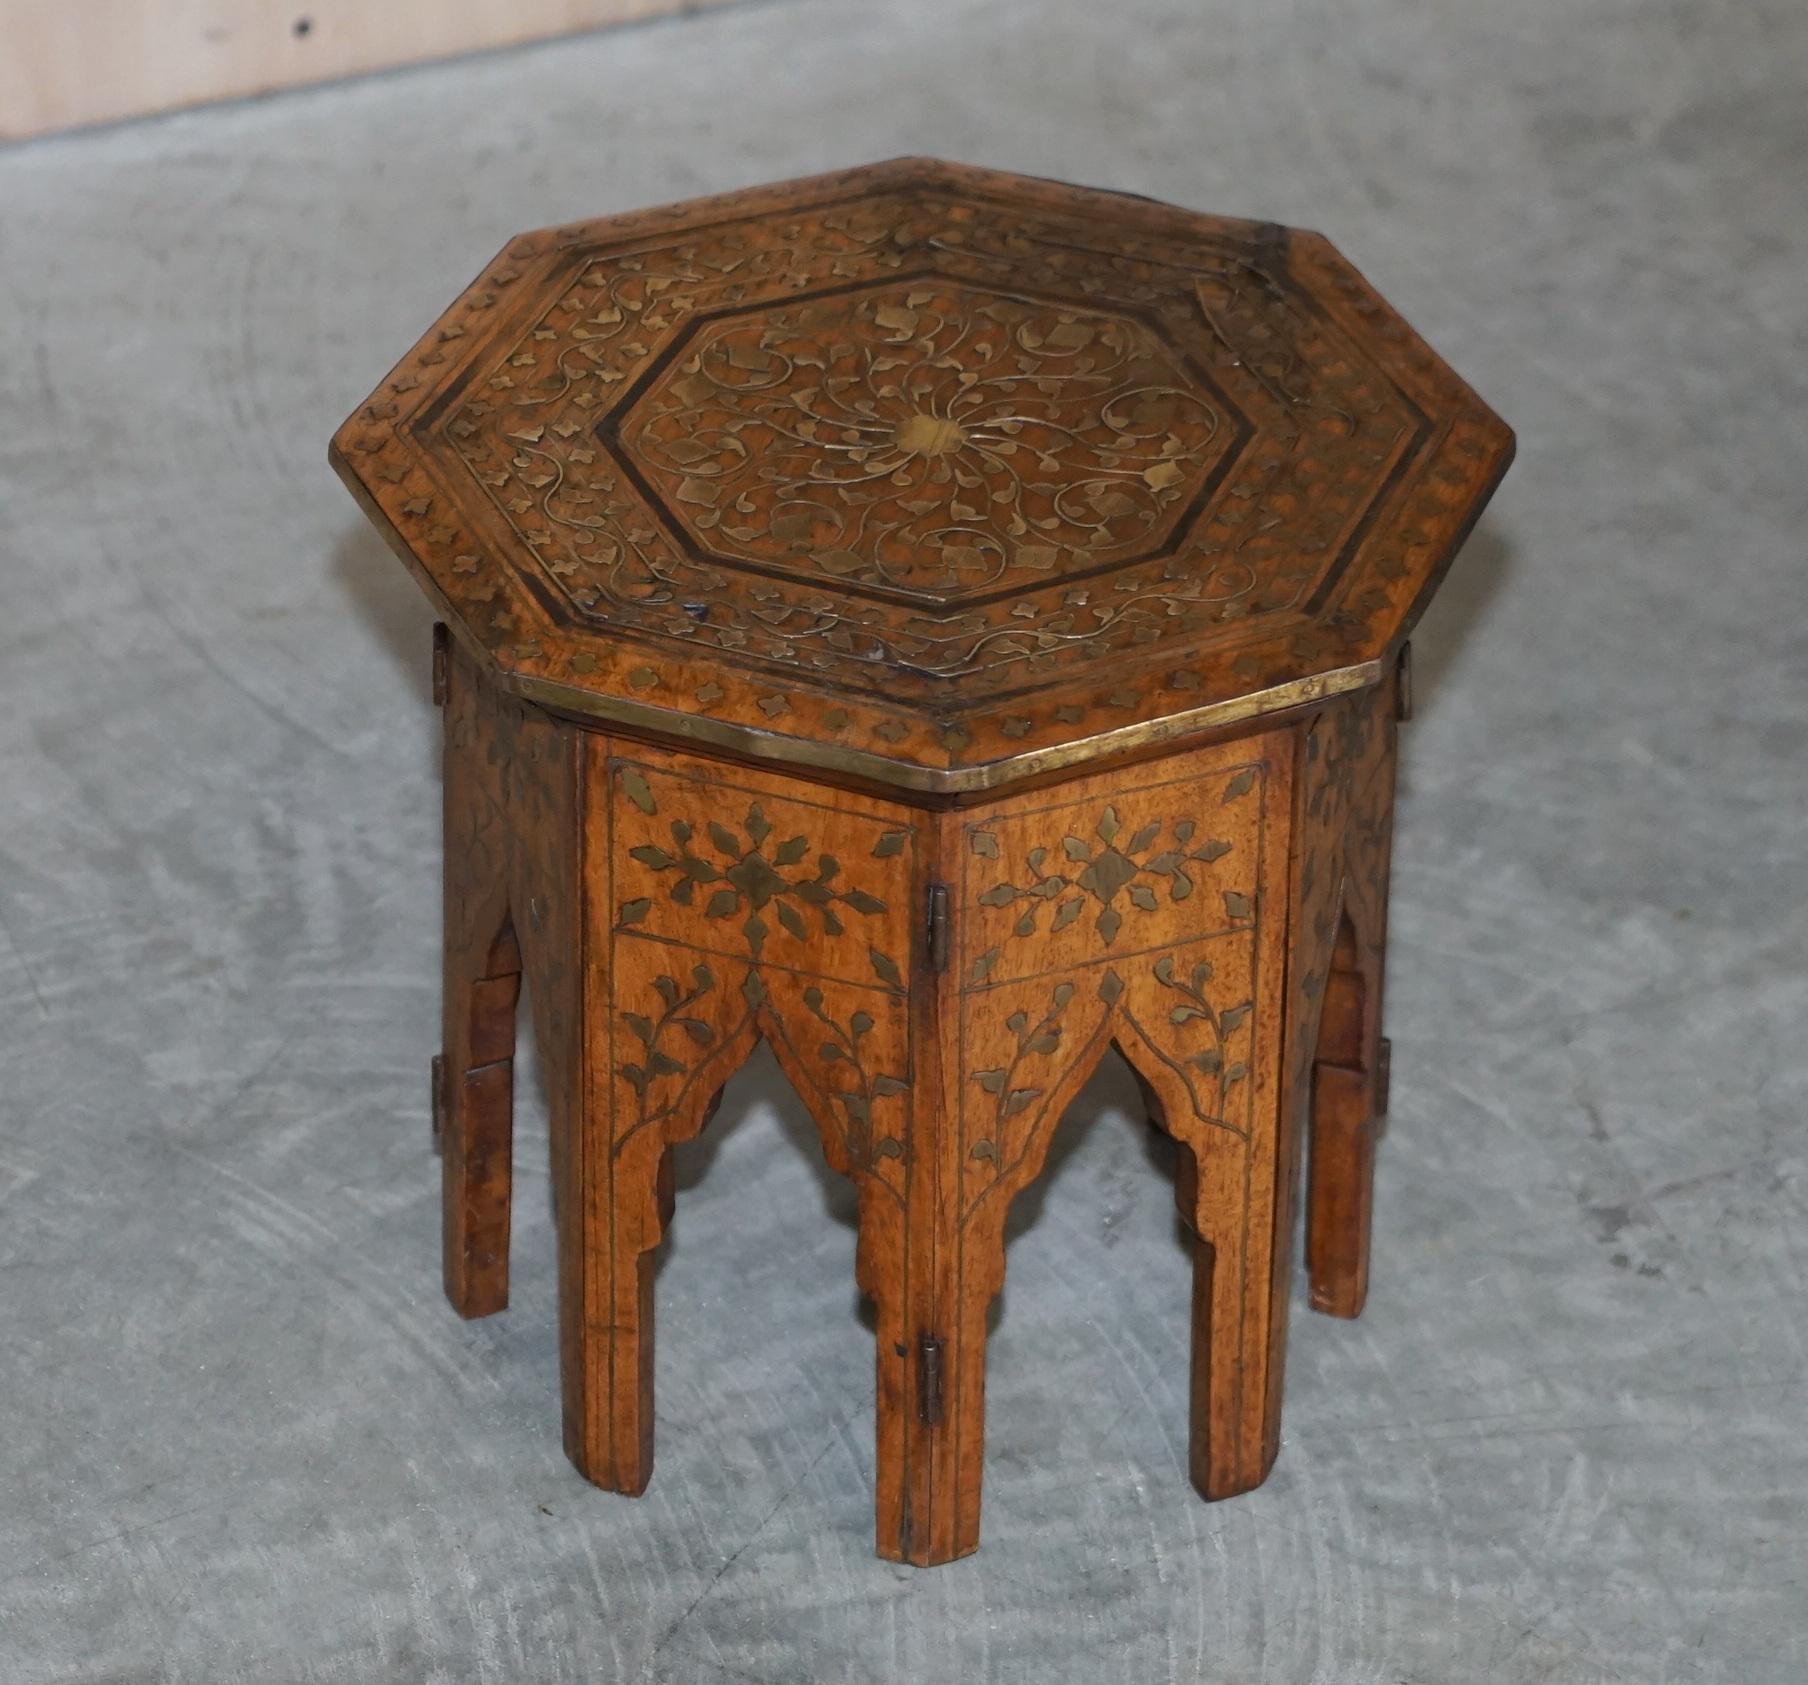 Royal House Antiques is delighted to offer for sale this lovely small hand carved from solid Rosewood with brass inlay Burmese side table

A very good looking and decorative table, this would be used as a drinks table for people sitting cross